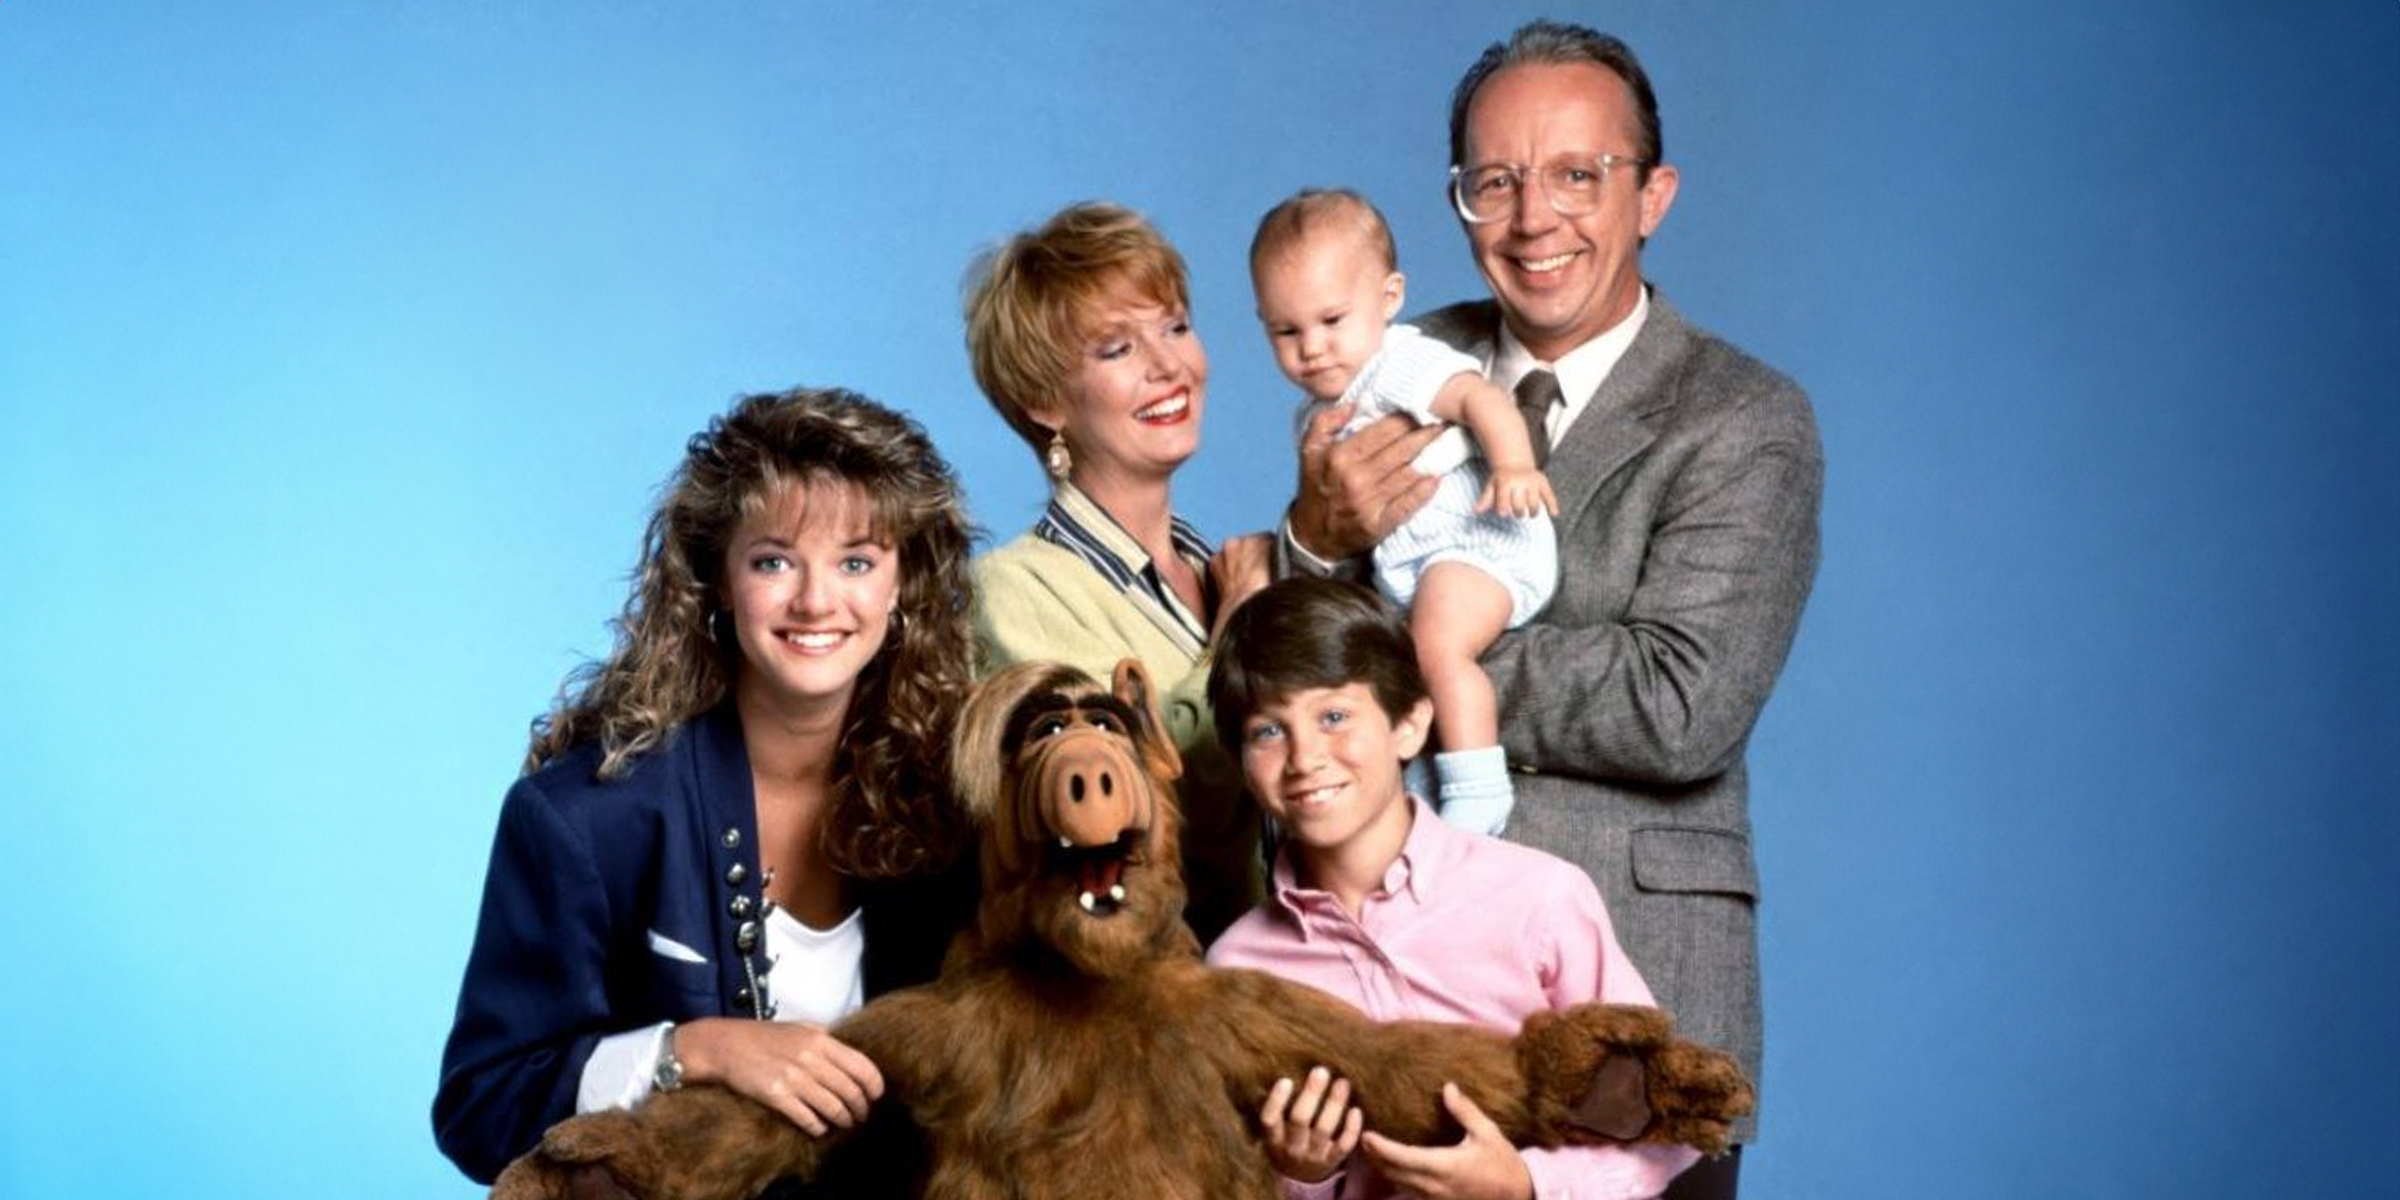 The Cast of "ALF | Source: Facebook/AlfMovieOfficial